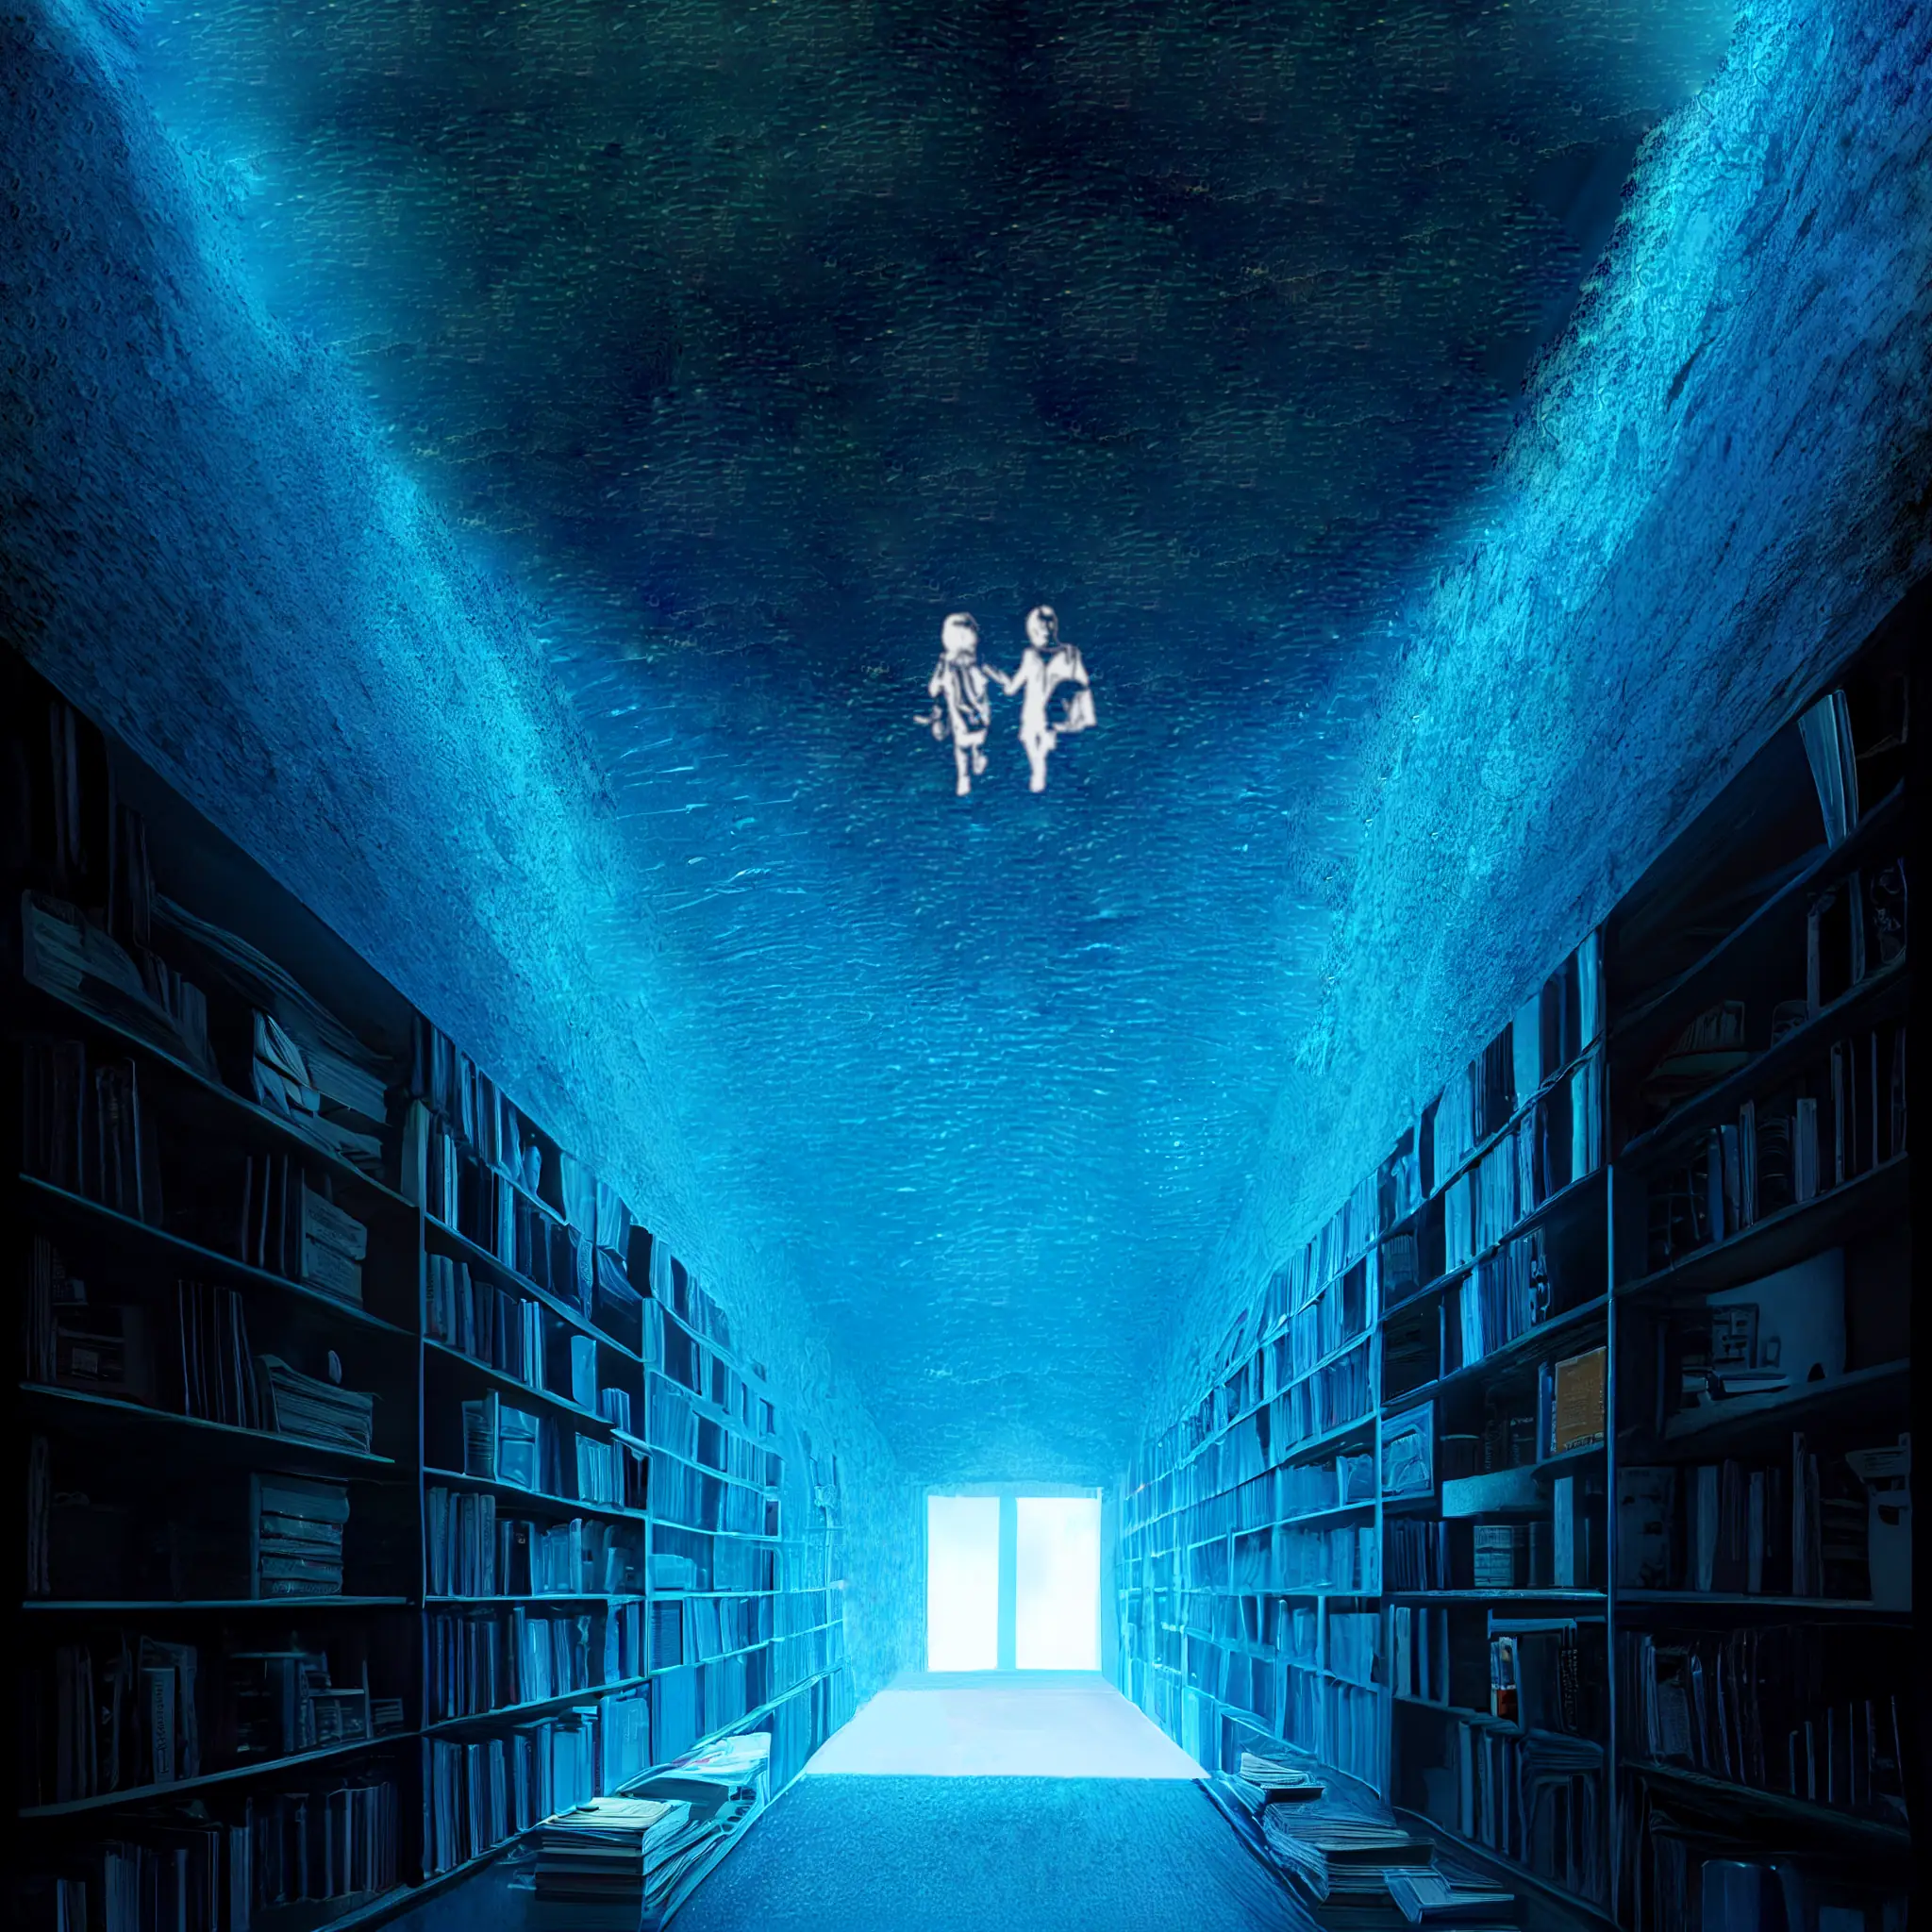 An artistic rendering of a blue room is telescoping away, there is a door or window, that is bathed in bright white light, at the end. The ceiling looks like it might be made of water.